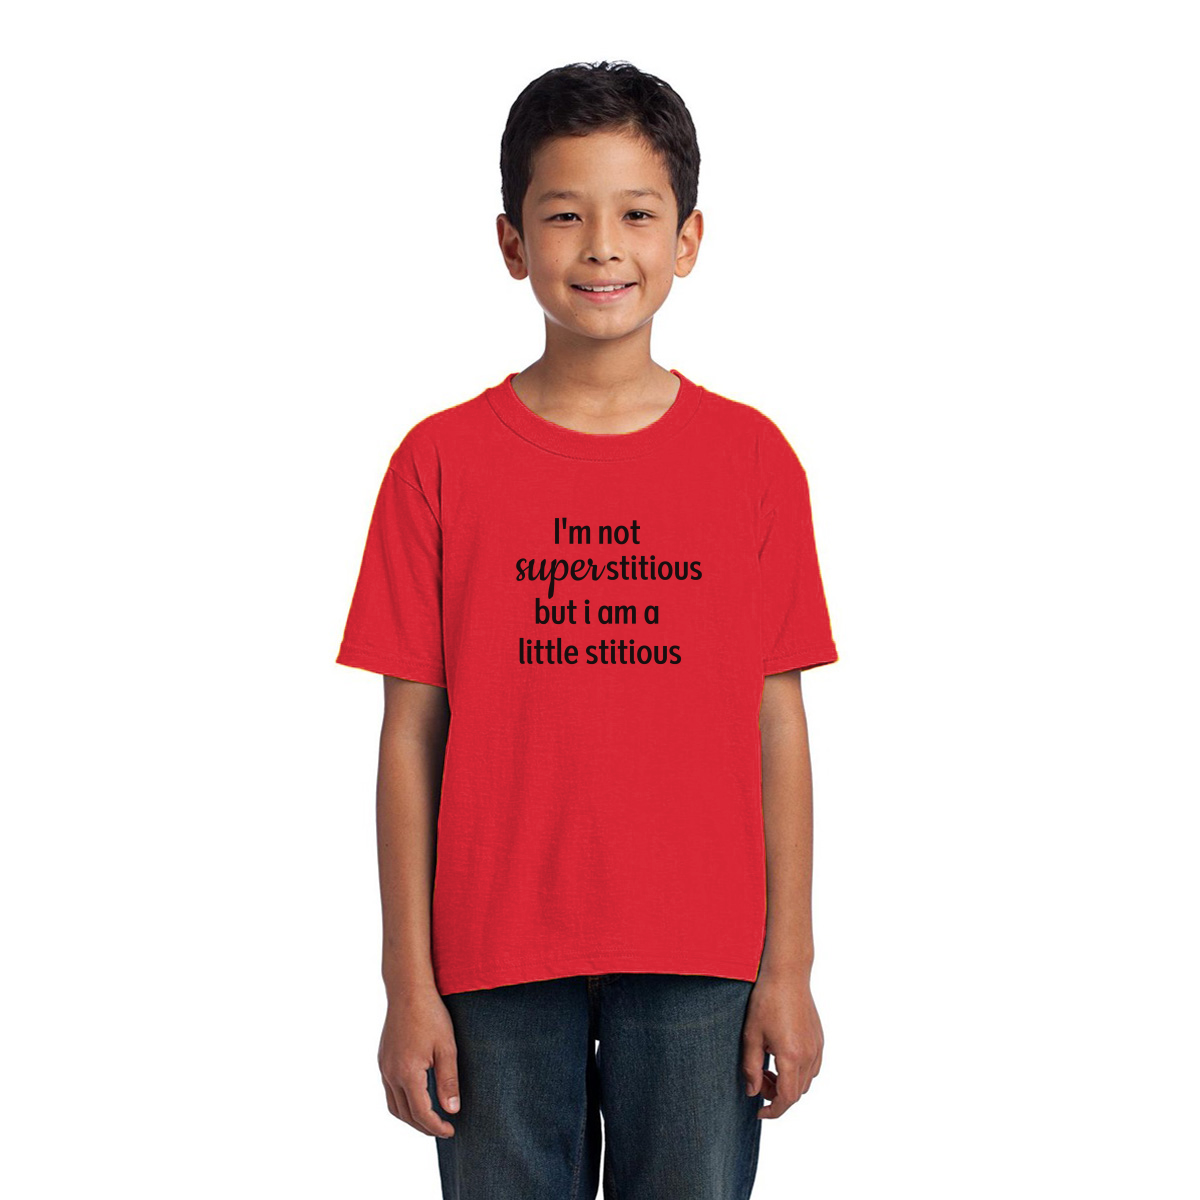 I'm Not Superstitious but I am a Little Stitious Kids T-shirt | Red